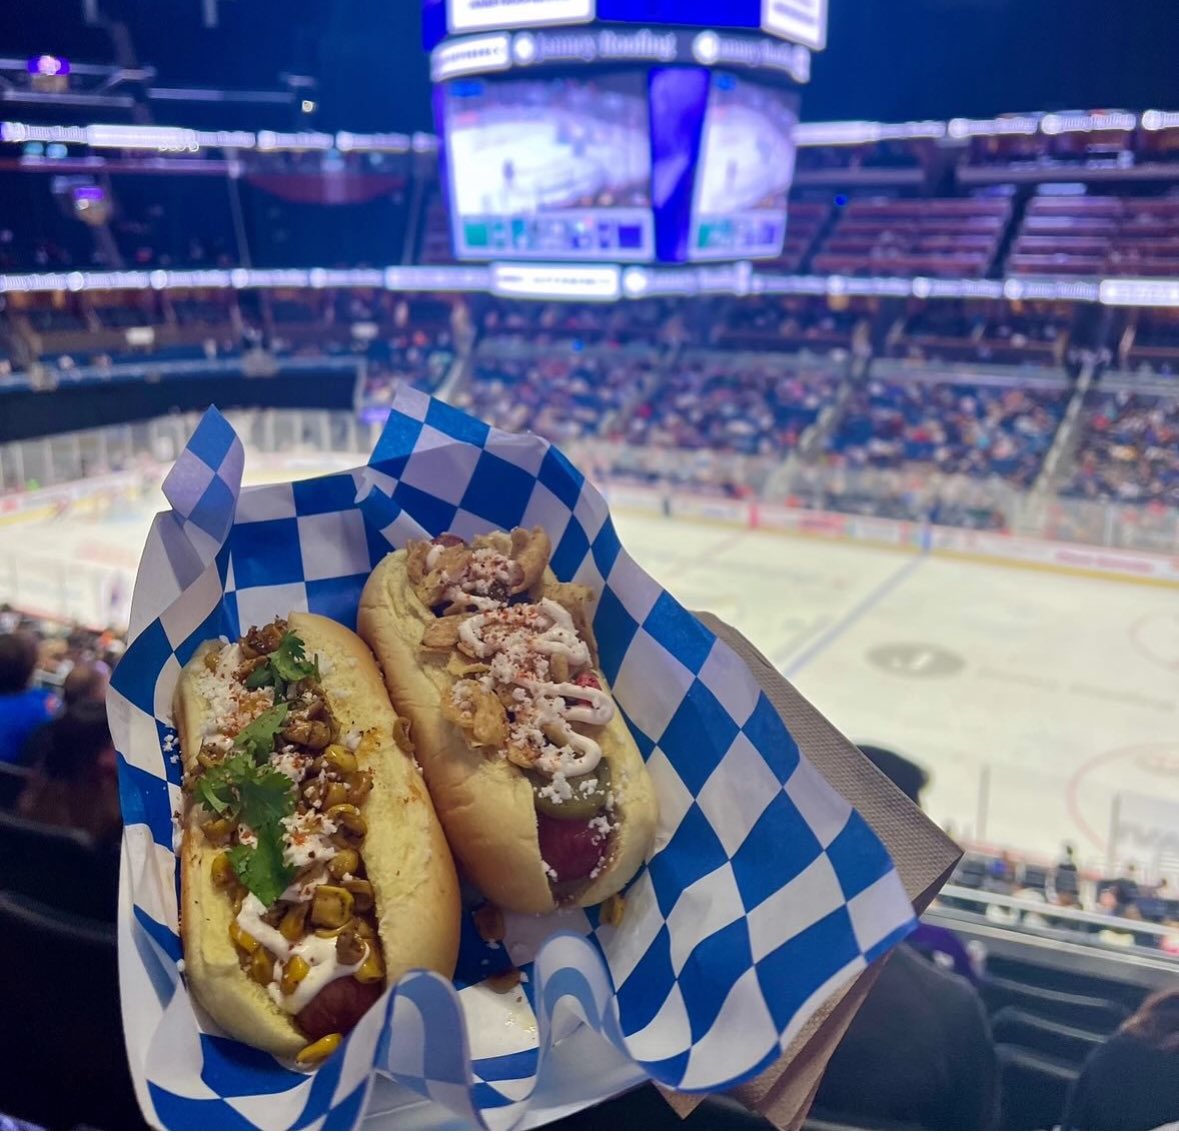 Big day for @CholoDogs in orlando. 
⚽️ @ORLPride 7pm section 3
🏒 @OrlandoHockey 6pm section 103
🍺 GB Bottleshop 6:45pm
🍺 Persimmon Hollow Lake Eola all day.